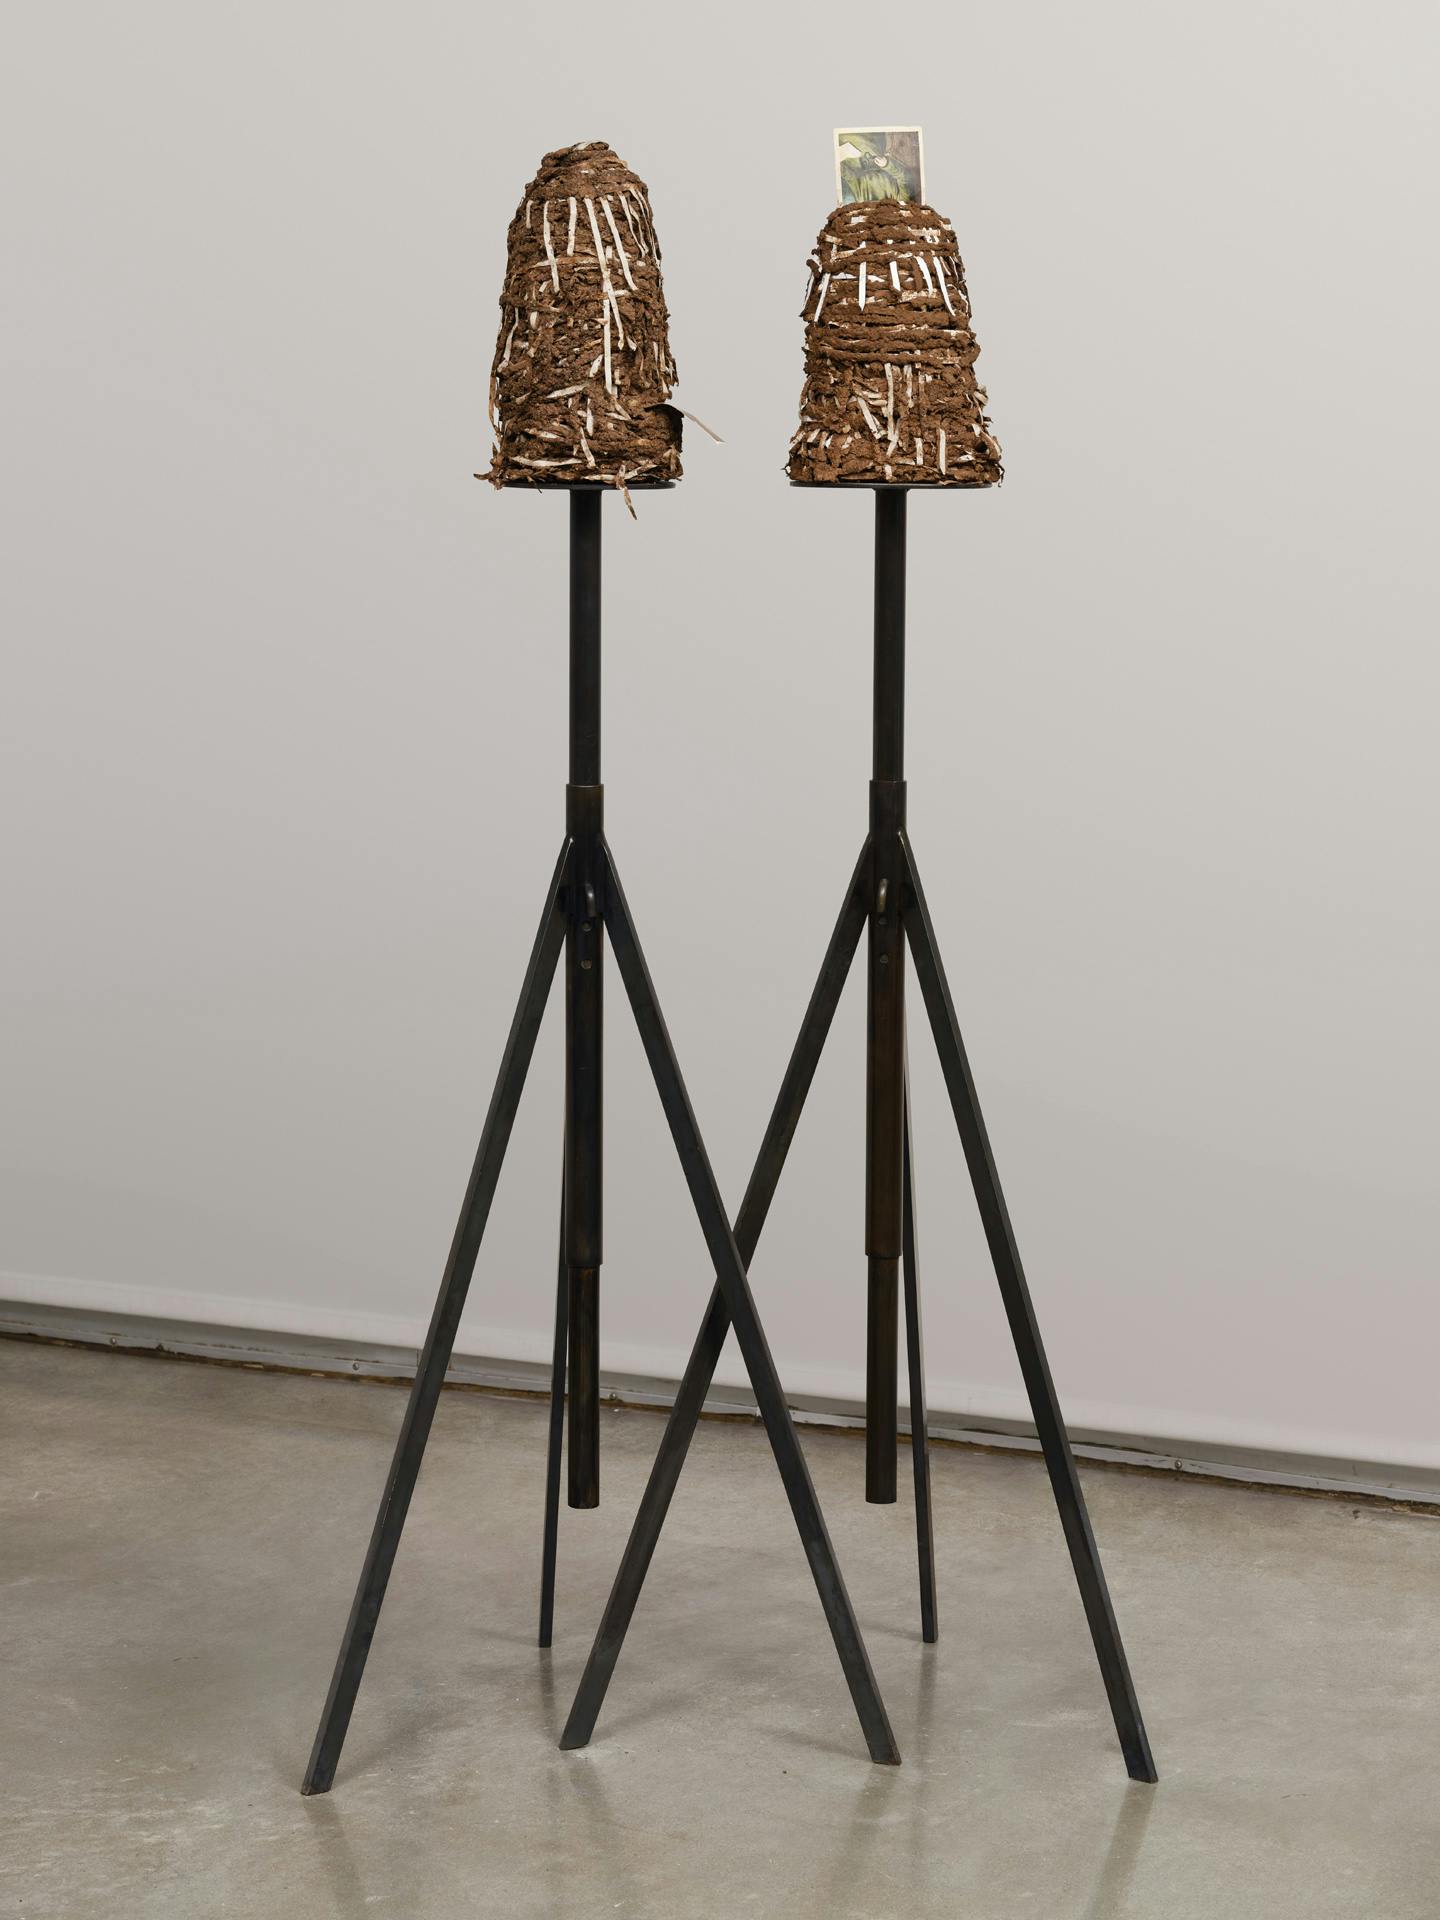 A sculpture in a gallery space. The sculpture consists of two moud-like forms made of brown adobe mud and strips of tape, each sitting atop a metal, tripod-like form.